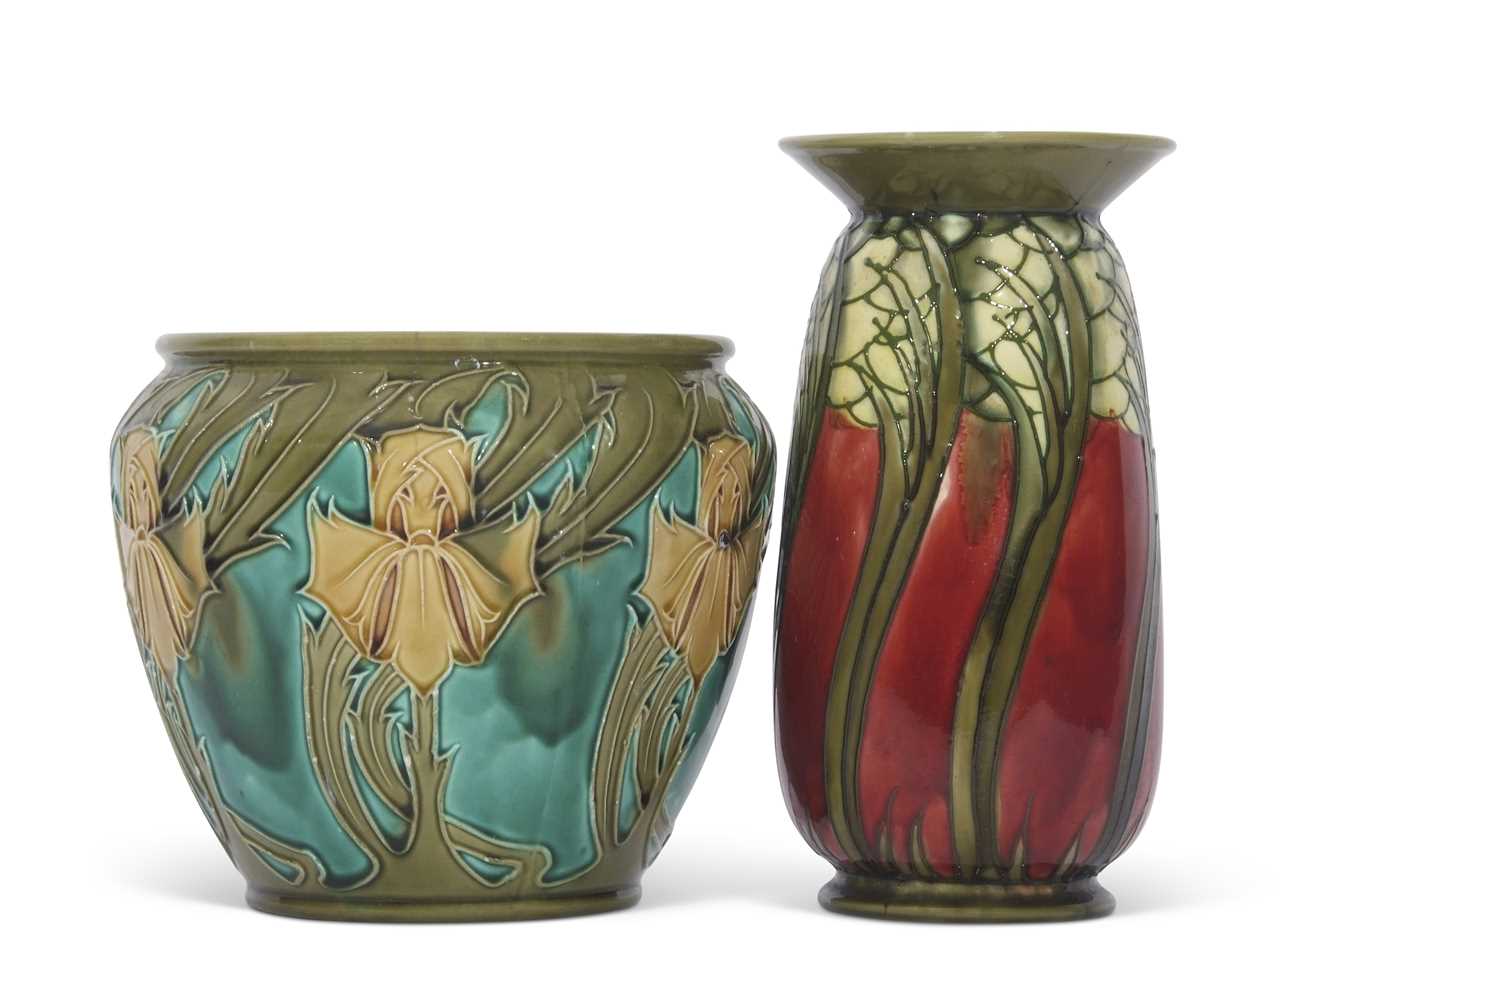 Minton Secessionist vase together with a Minton Secessionist jardiniere (crack to rim) (2)